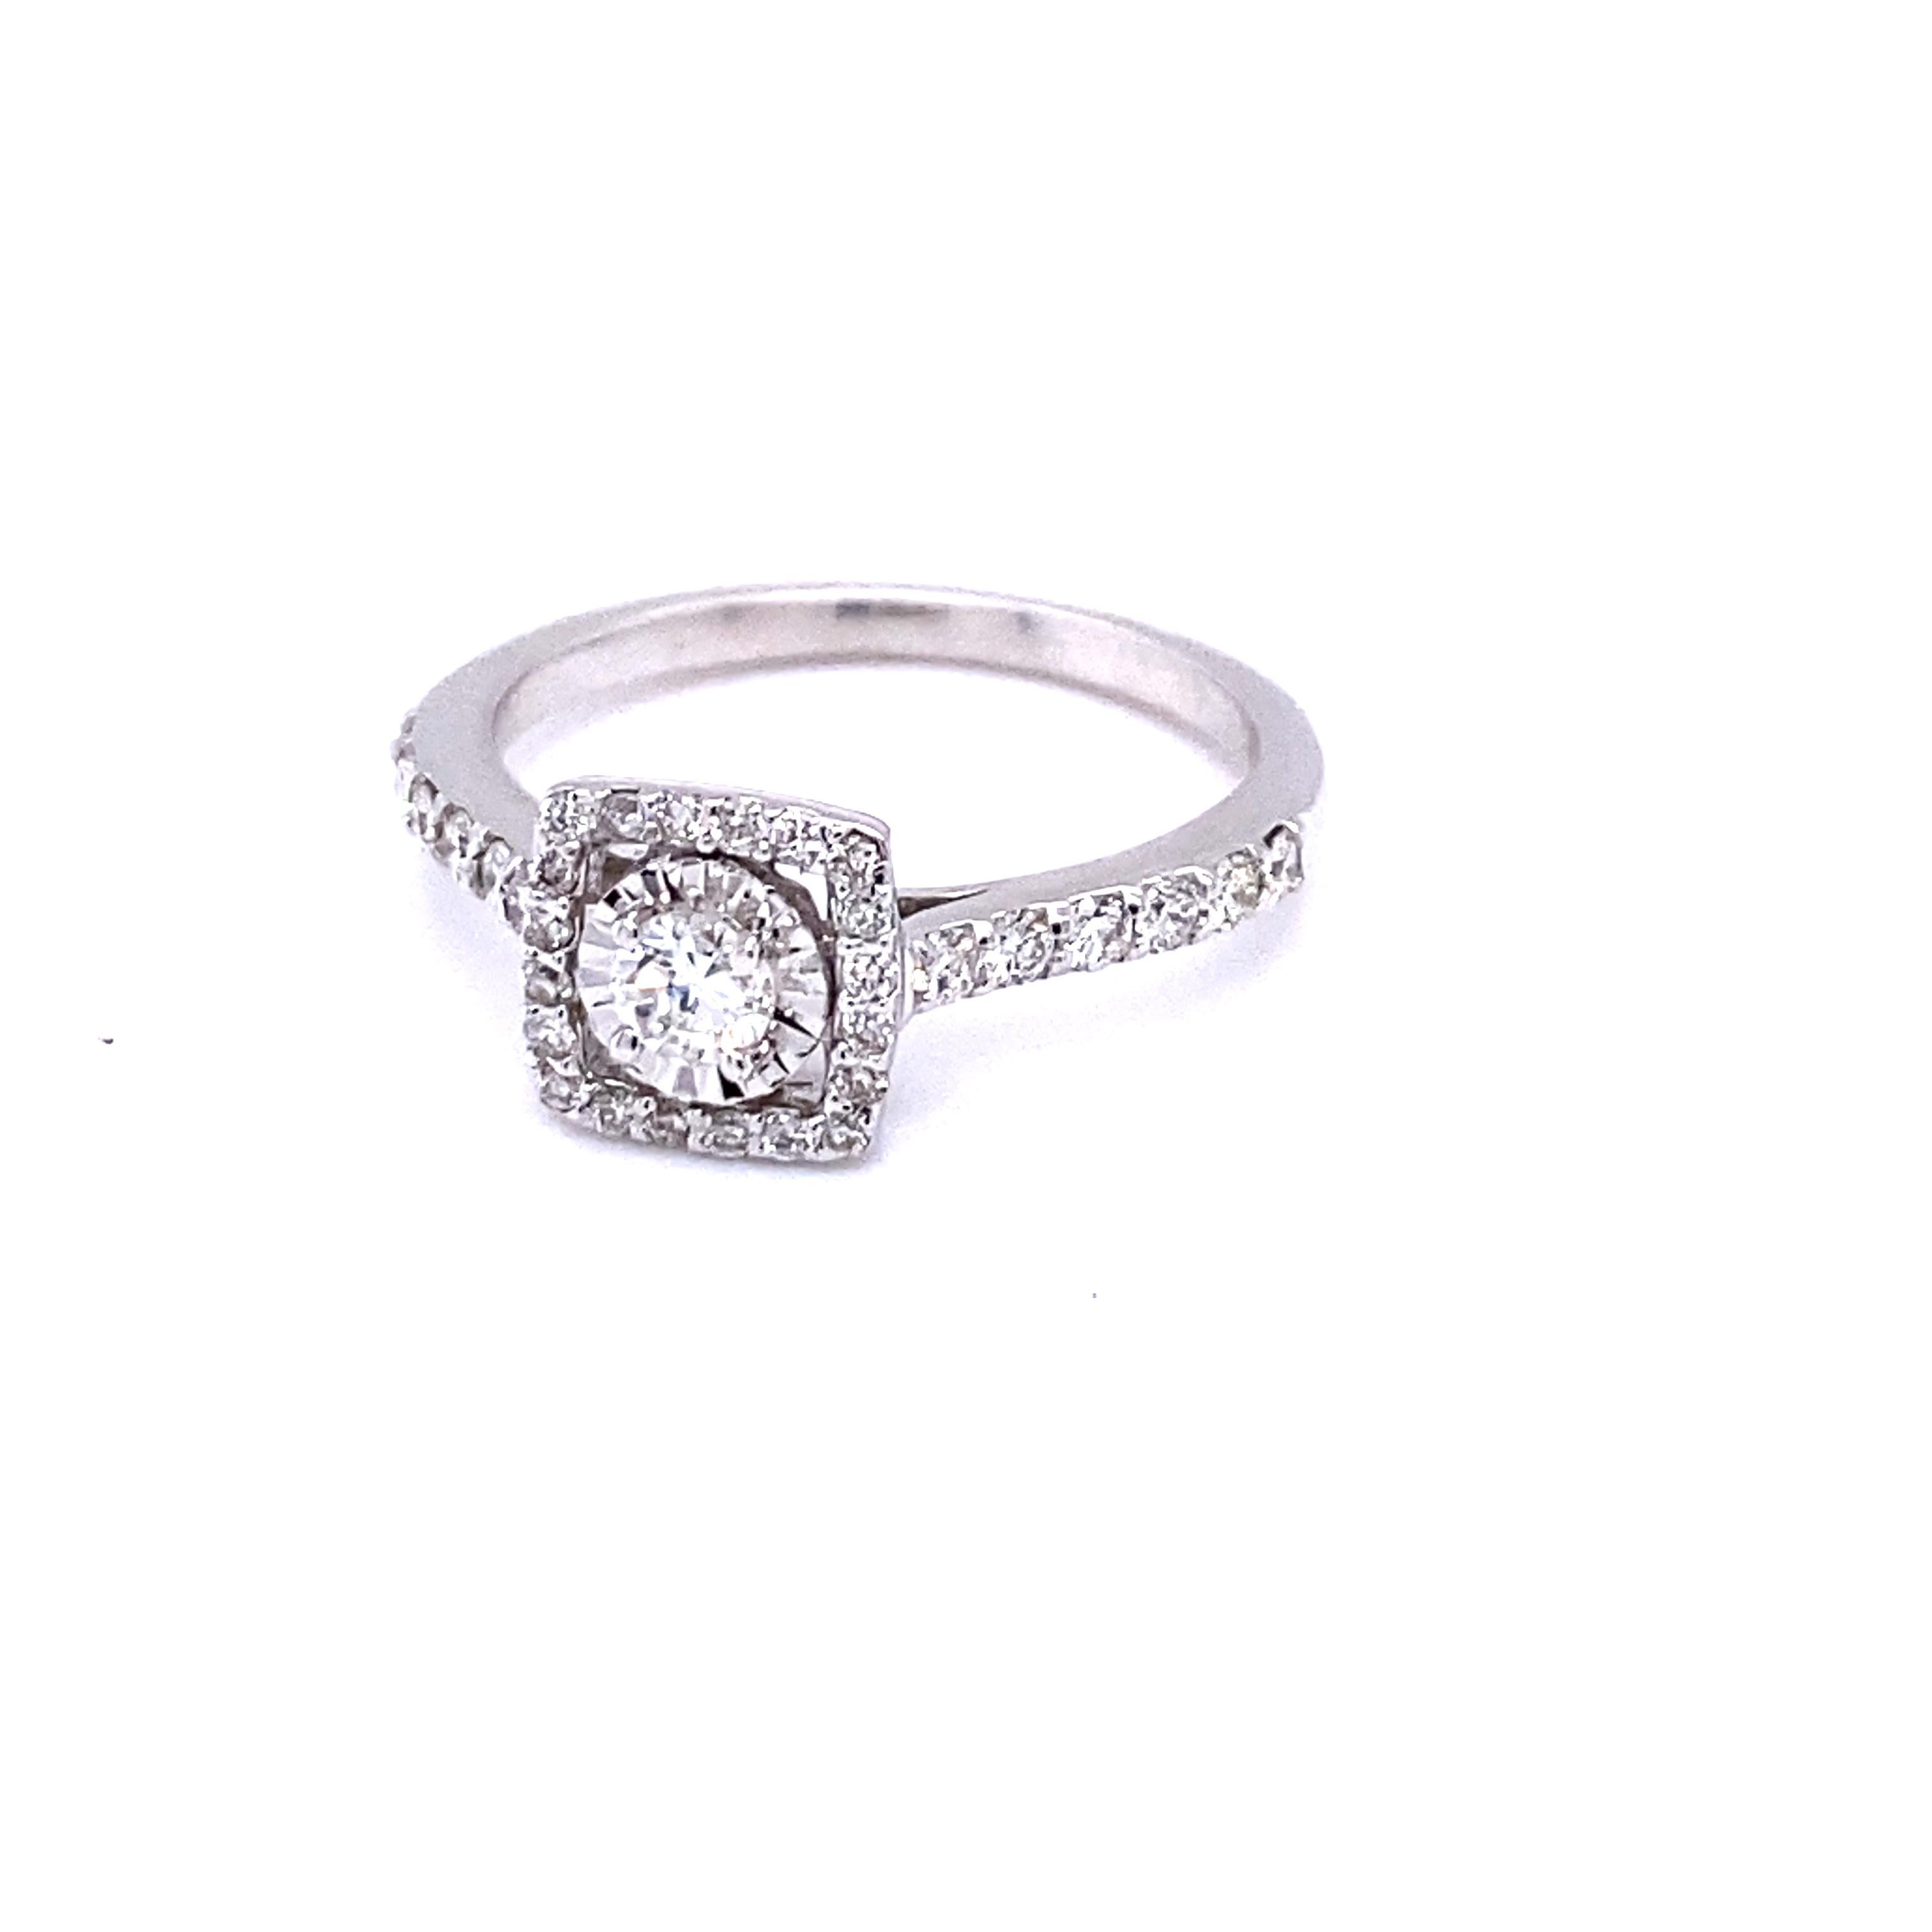 A beautiful Round Cut Diamond Solitaire ring set in a Halo Diamond setting.

The center Round Cut Diamond has a total of 33 Round Cut Diamonds that weigh 0.56 Carats and Clarity and Color of the Diamonds is VS-H.
It is set in 14K White Gold and is